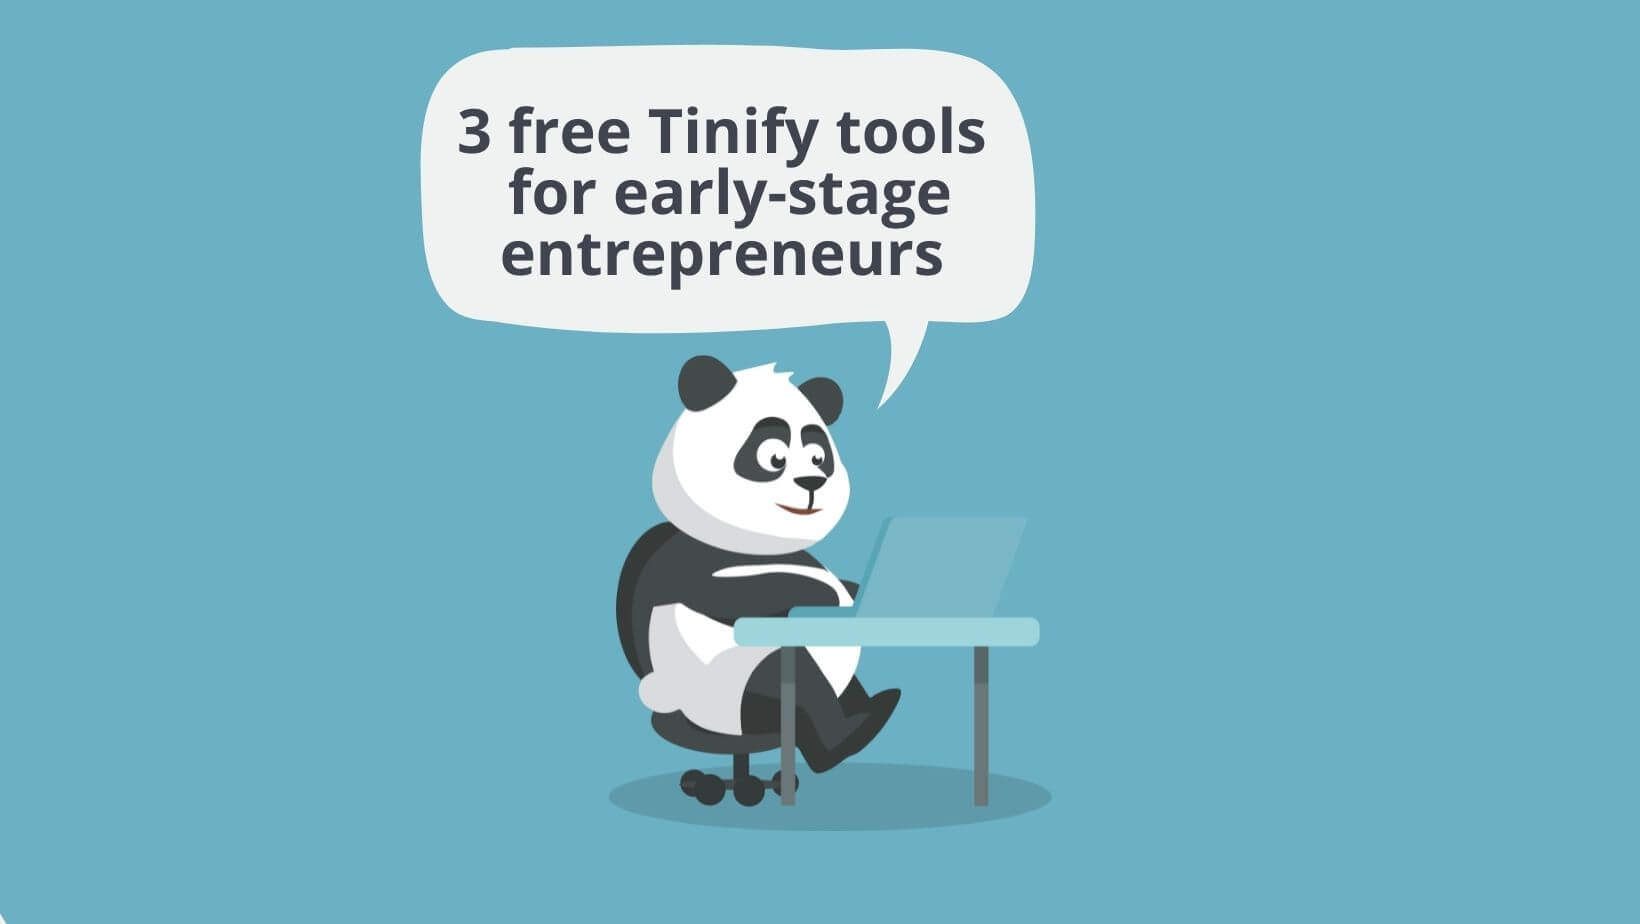 3 free Tinify tools for early-stage entrepreneurs 